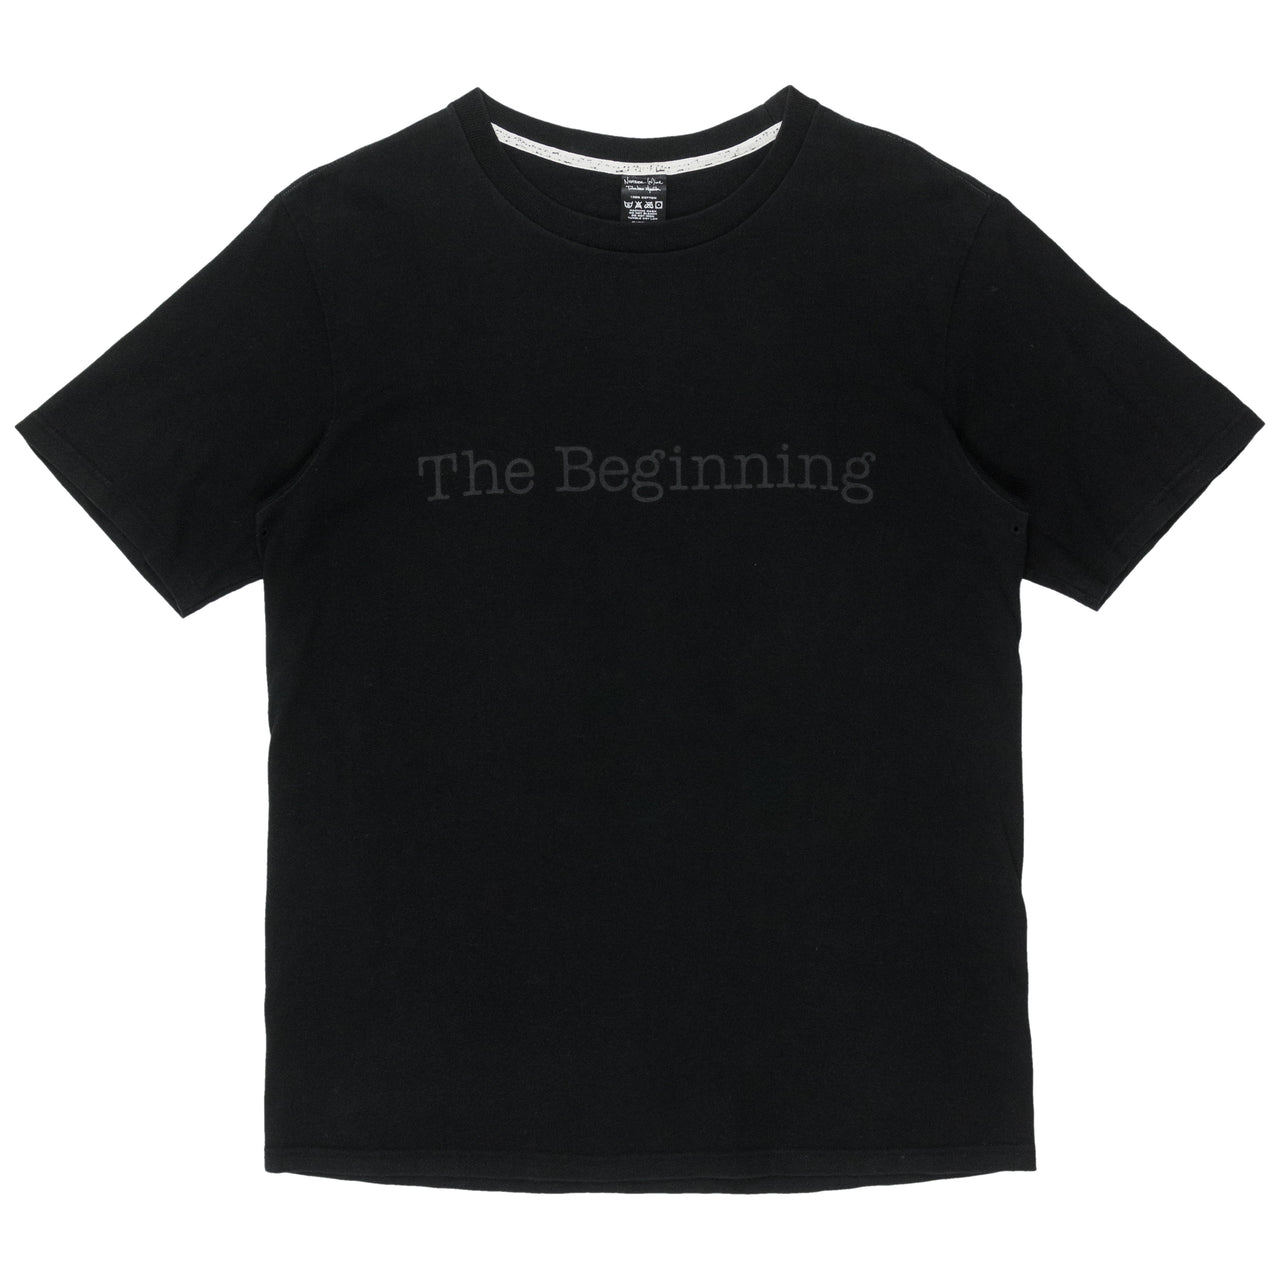 Number Nine "The Beginning, Last Say Good Bye" Tee - AW09 "A Closed Feeling"